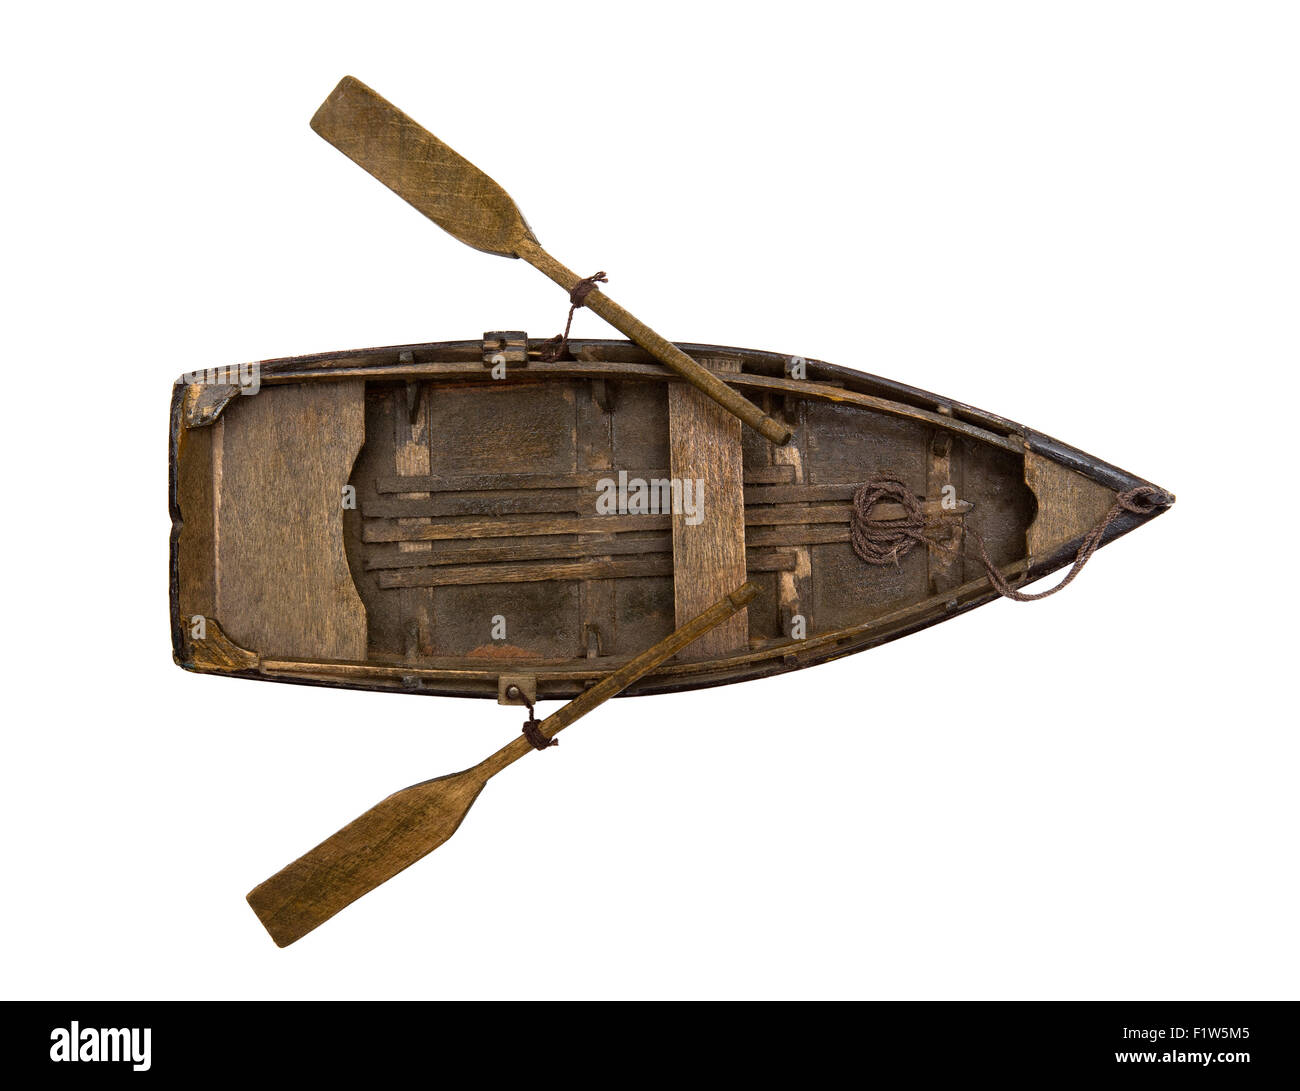 Old wooden fishing boat Cut Out Stock Images & Pictures - Alamy